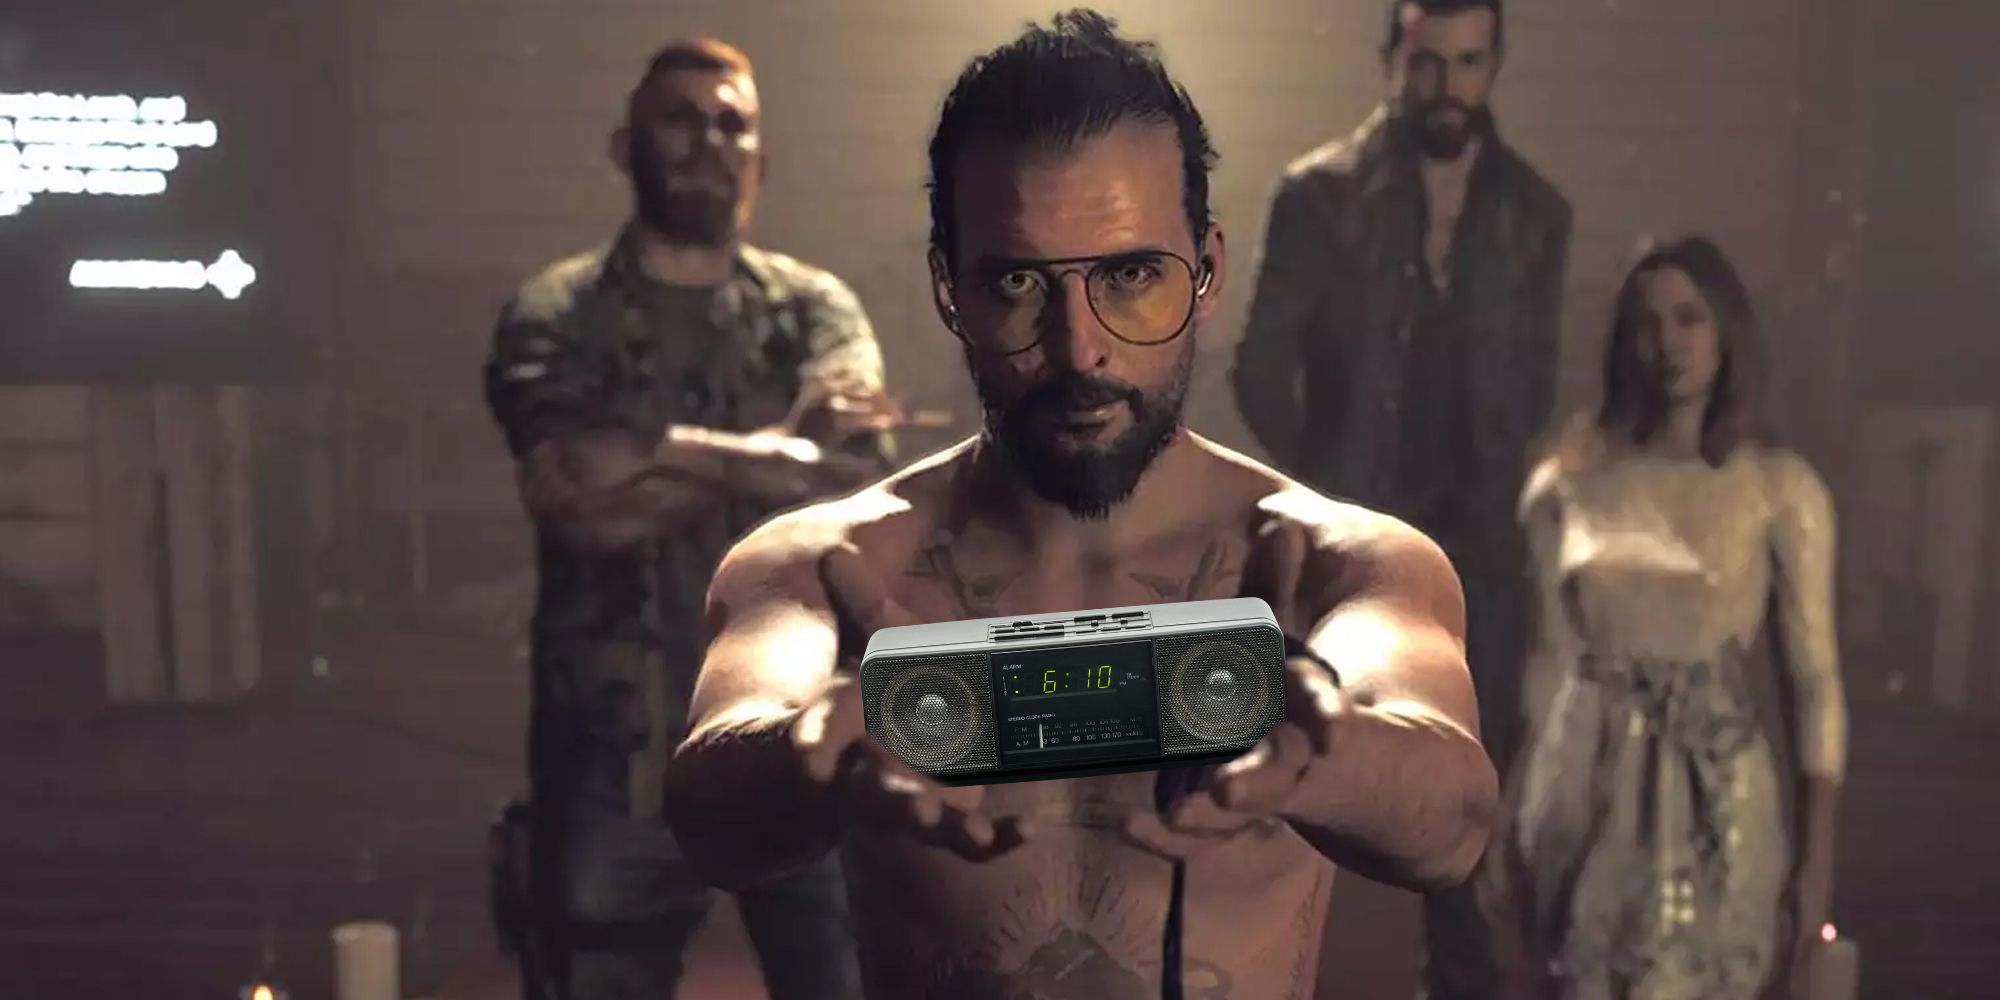 Far Cry 5's antagonist holding a clock.